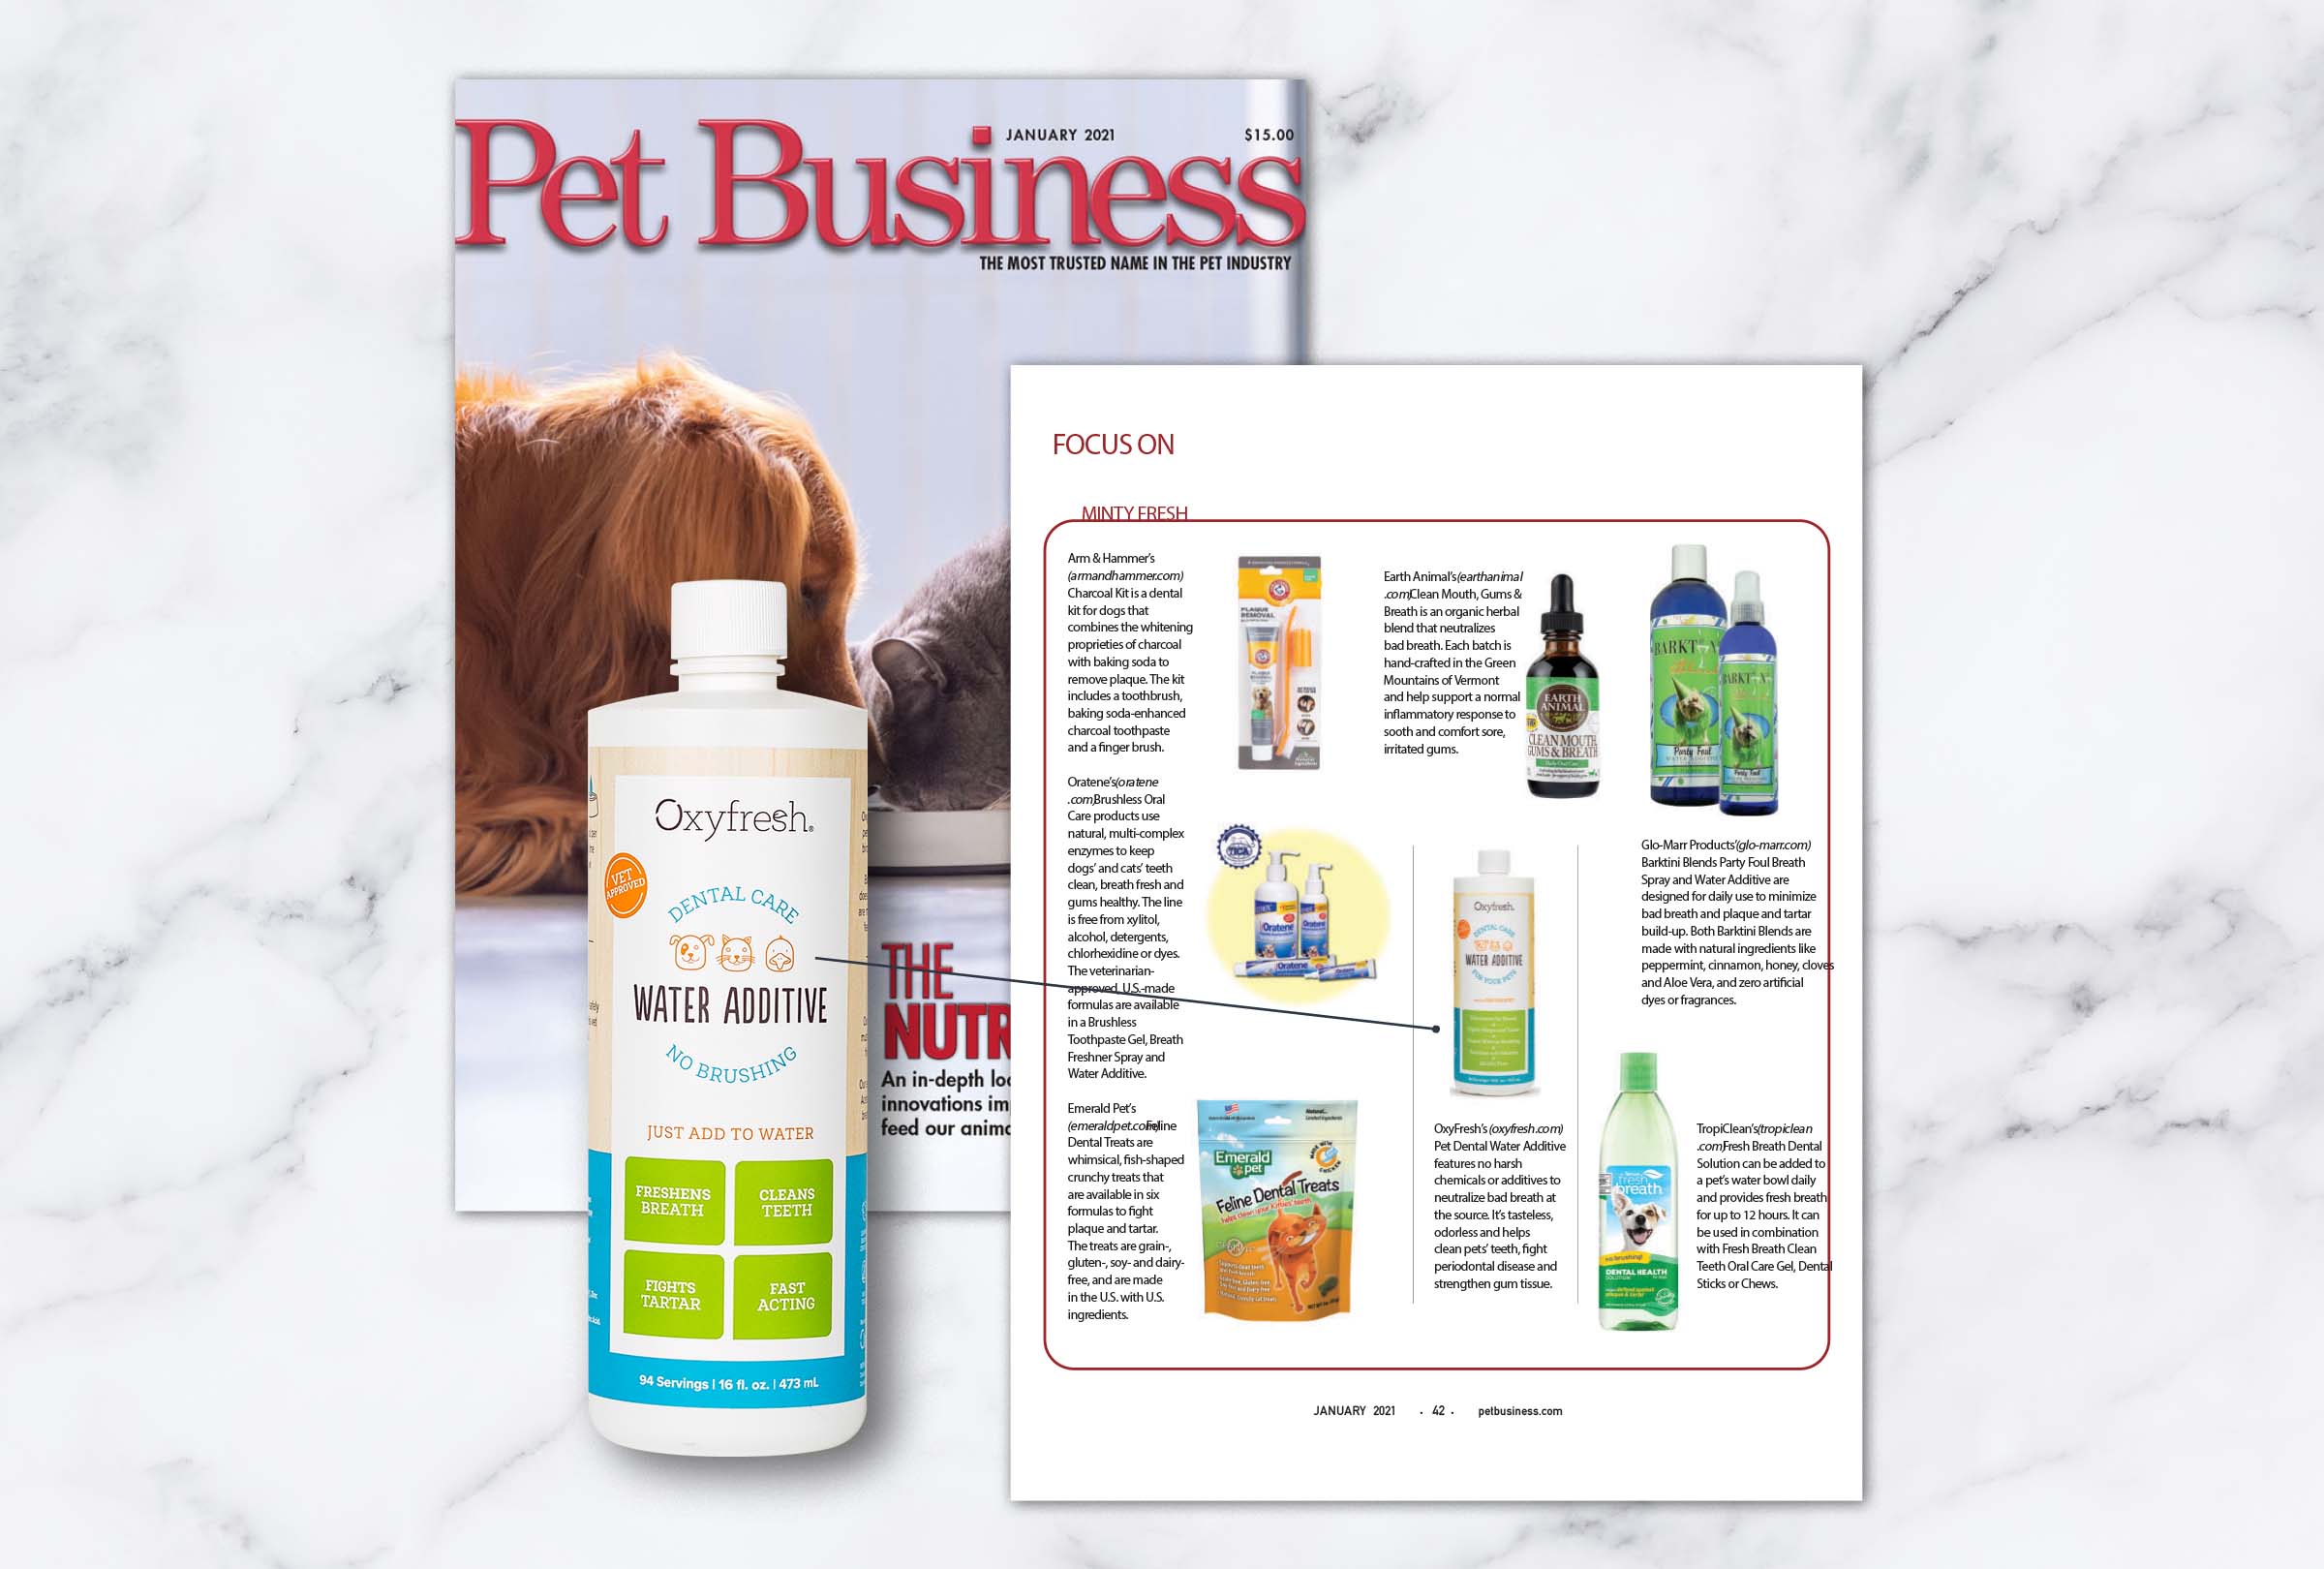 Oxyfresh Pet Dental Water Additive featured in January 2021 Issue of Pet Business